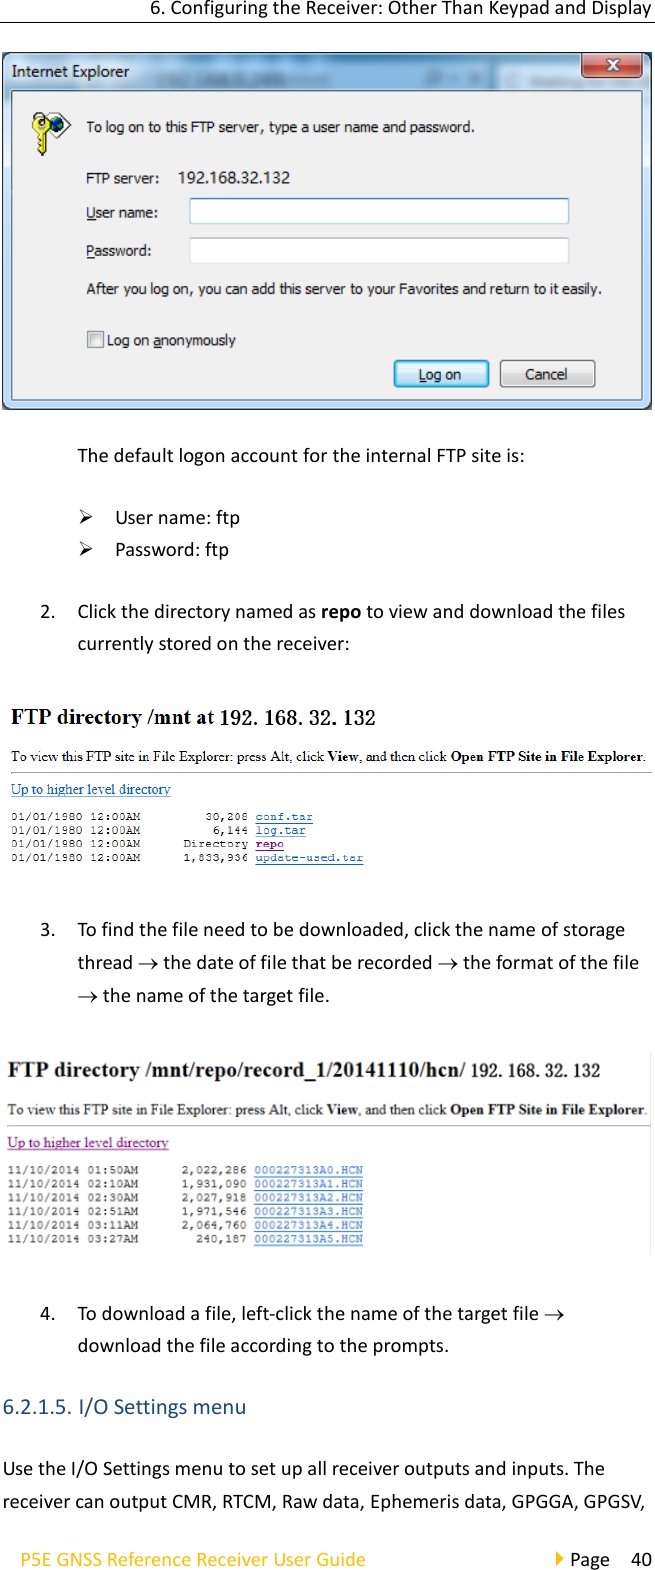 6. Configuring the Receiver: Other Than Keypad and Display P5E GNSS Reference Receiver User Guide                                     Page  40  The default logon account for the internal FTP site is: ➢ User name: ftp ➢ Password: ftp 2. Click the directory named as repo to view and download the files currently stored on the receiver:  3. To find the file need to be downloaded, click the name of storage thread  the date of file that be recorded  the format of the file  the name of the target file.    4. To download a file, left-click the name of the target file  download the file according to the prompts. 6.2.1.5. I/O Settings menu Use the I/O Settings menu to set up all receiver outputs and inputs. The receiver can output CMR, RTCM, Raw data, Ephemeris data, GPGGA, GPGSV, 